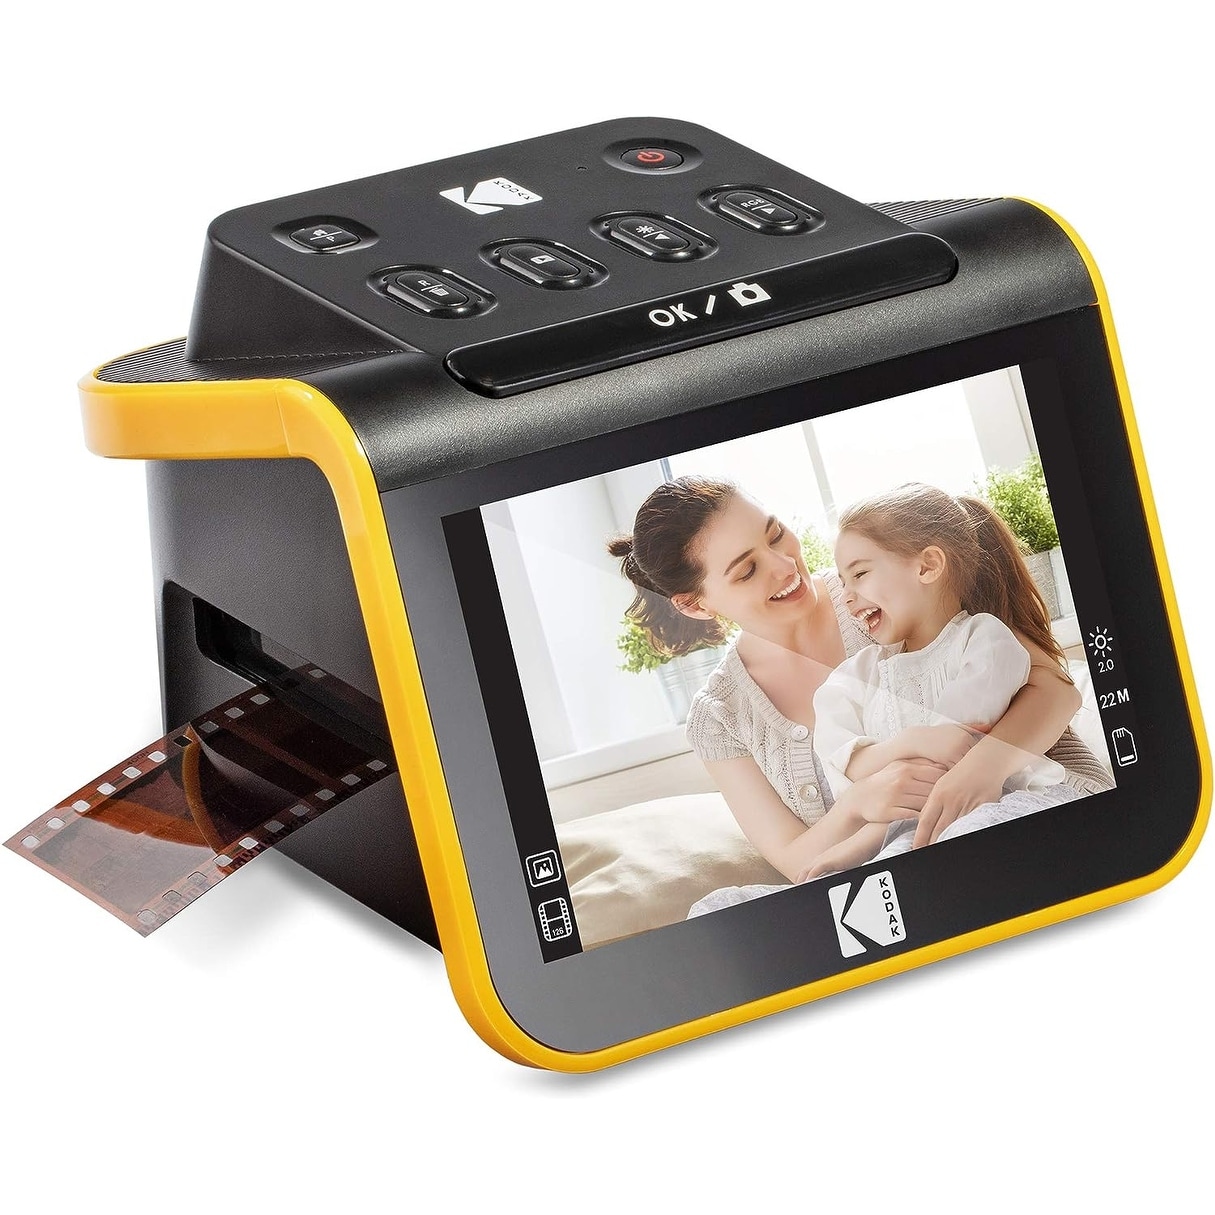 https://ak1.ostkcdn.com/images/products/is/images/direct/1a367ff24dd873fb34f9dcf0e484e96fb34e338d/Kodak-Slide-N-SCAN-Film-and-Slide-Scanner-with-5%22-LCD-Screen%2C-Converts-Negatives-%26-Slides-to-JPEG.jpg